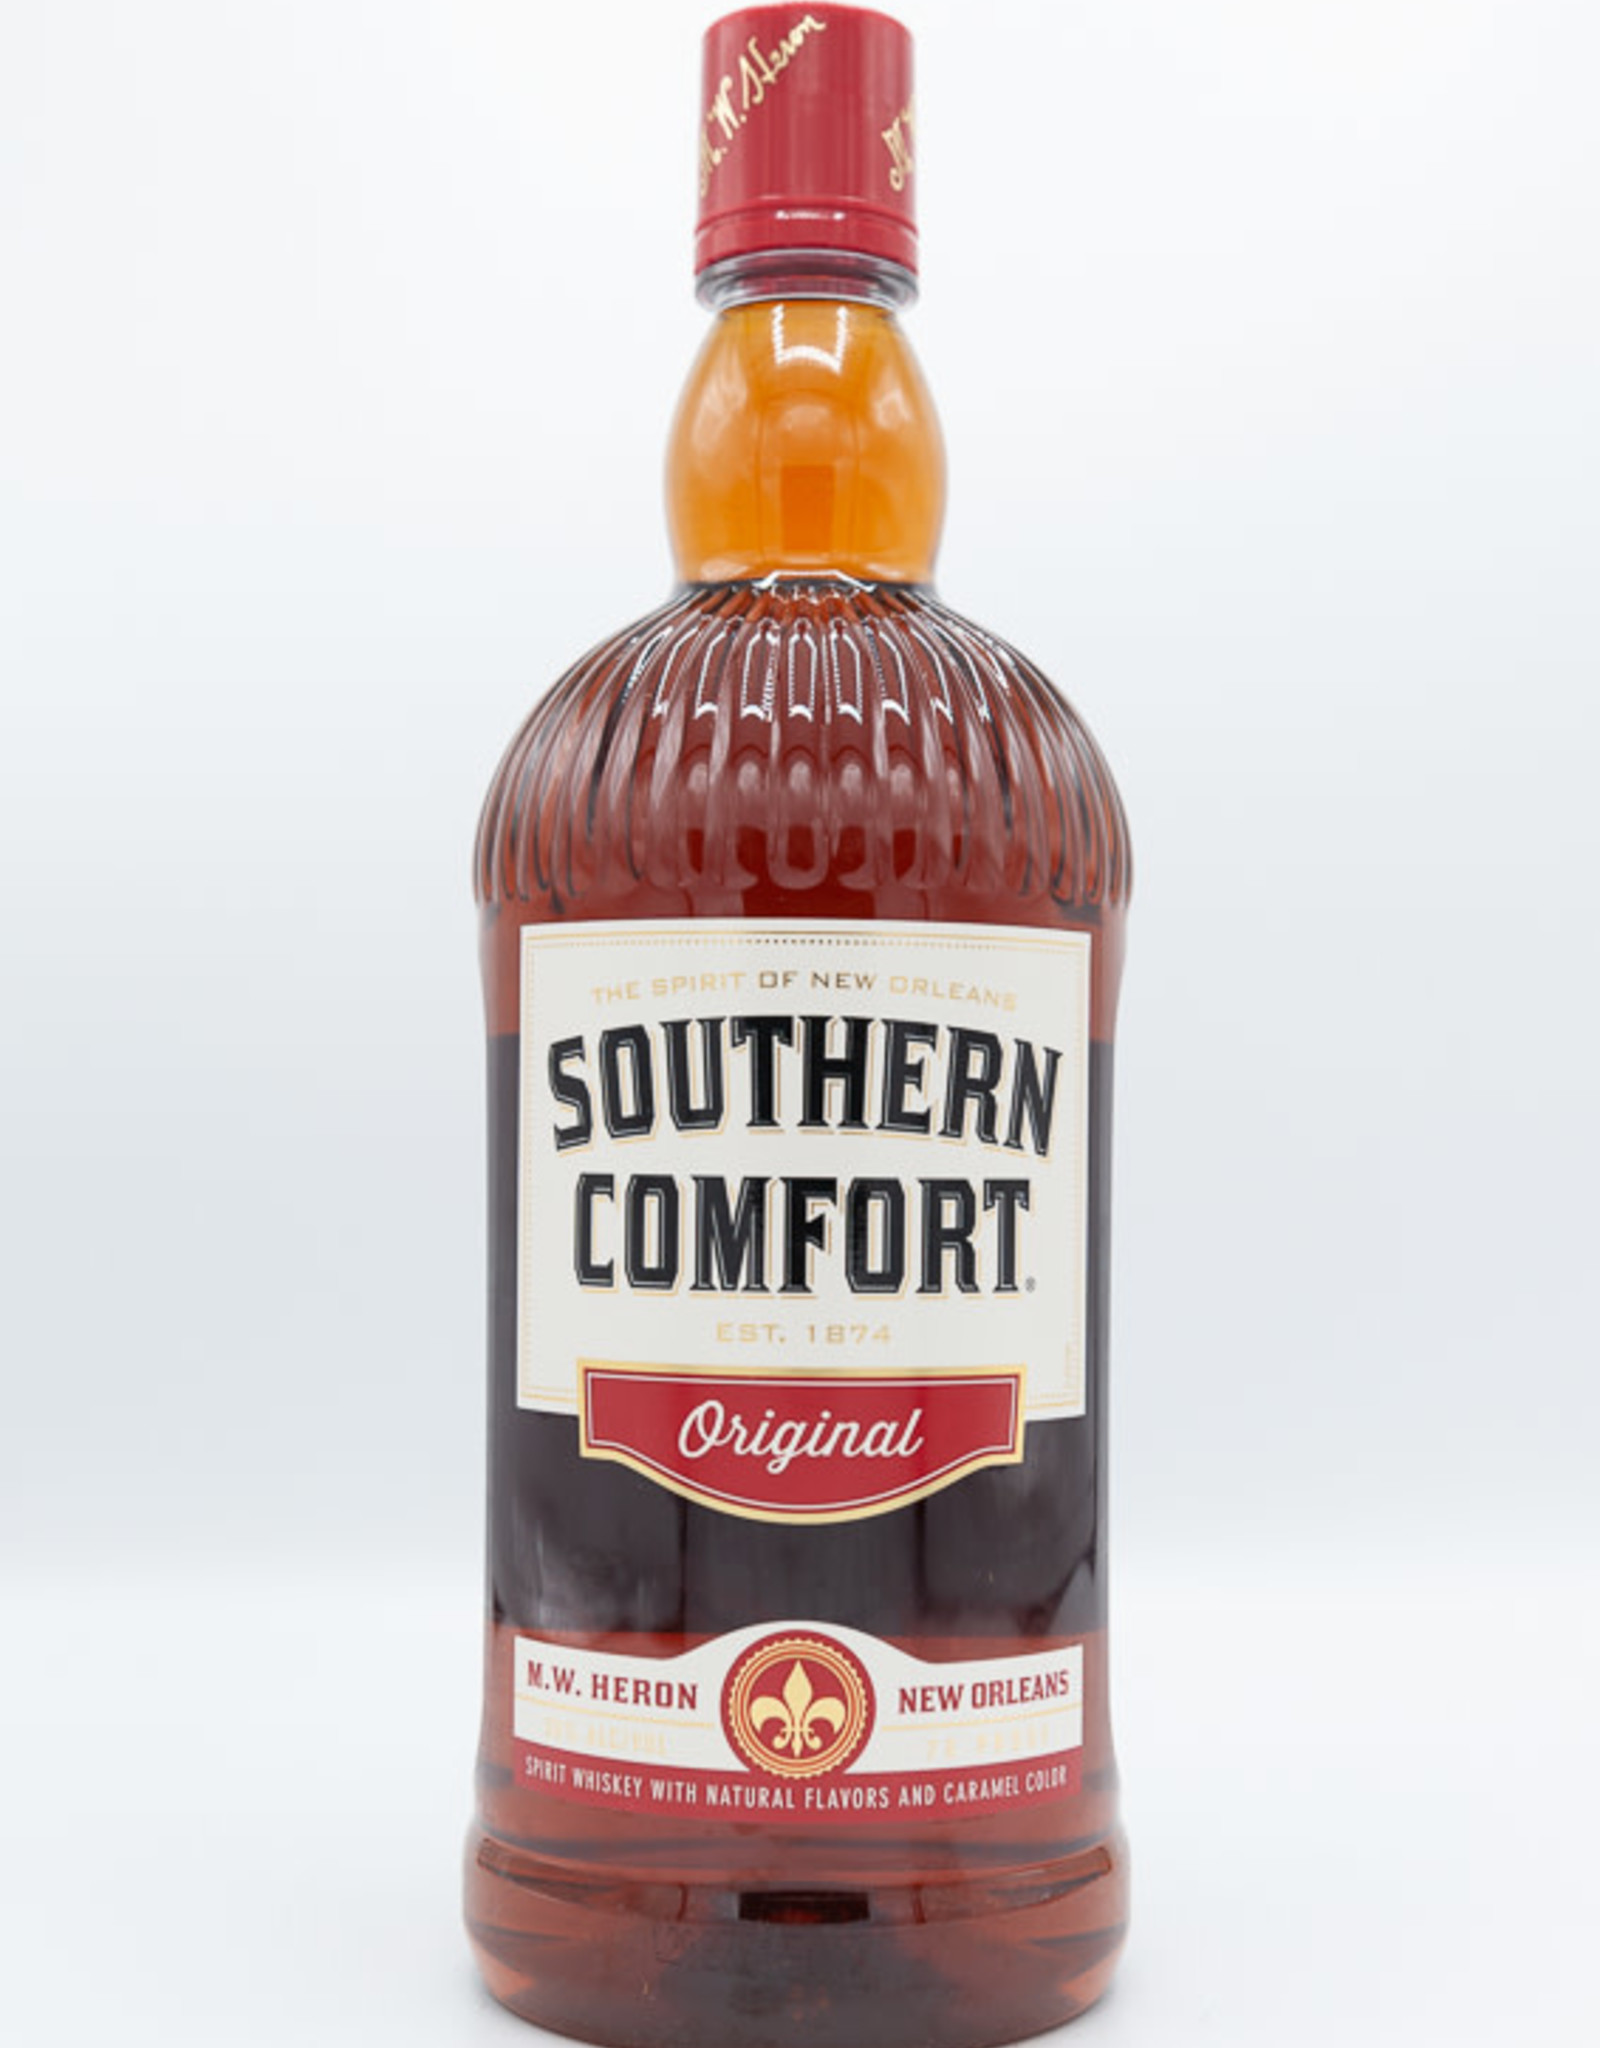 Southern Comfort Southern Comfort